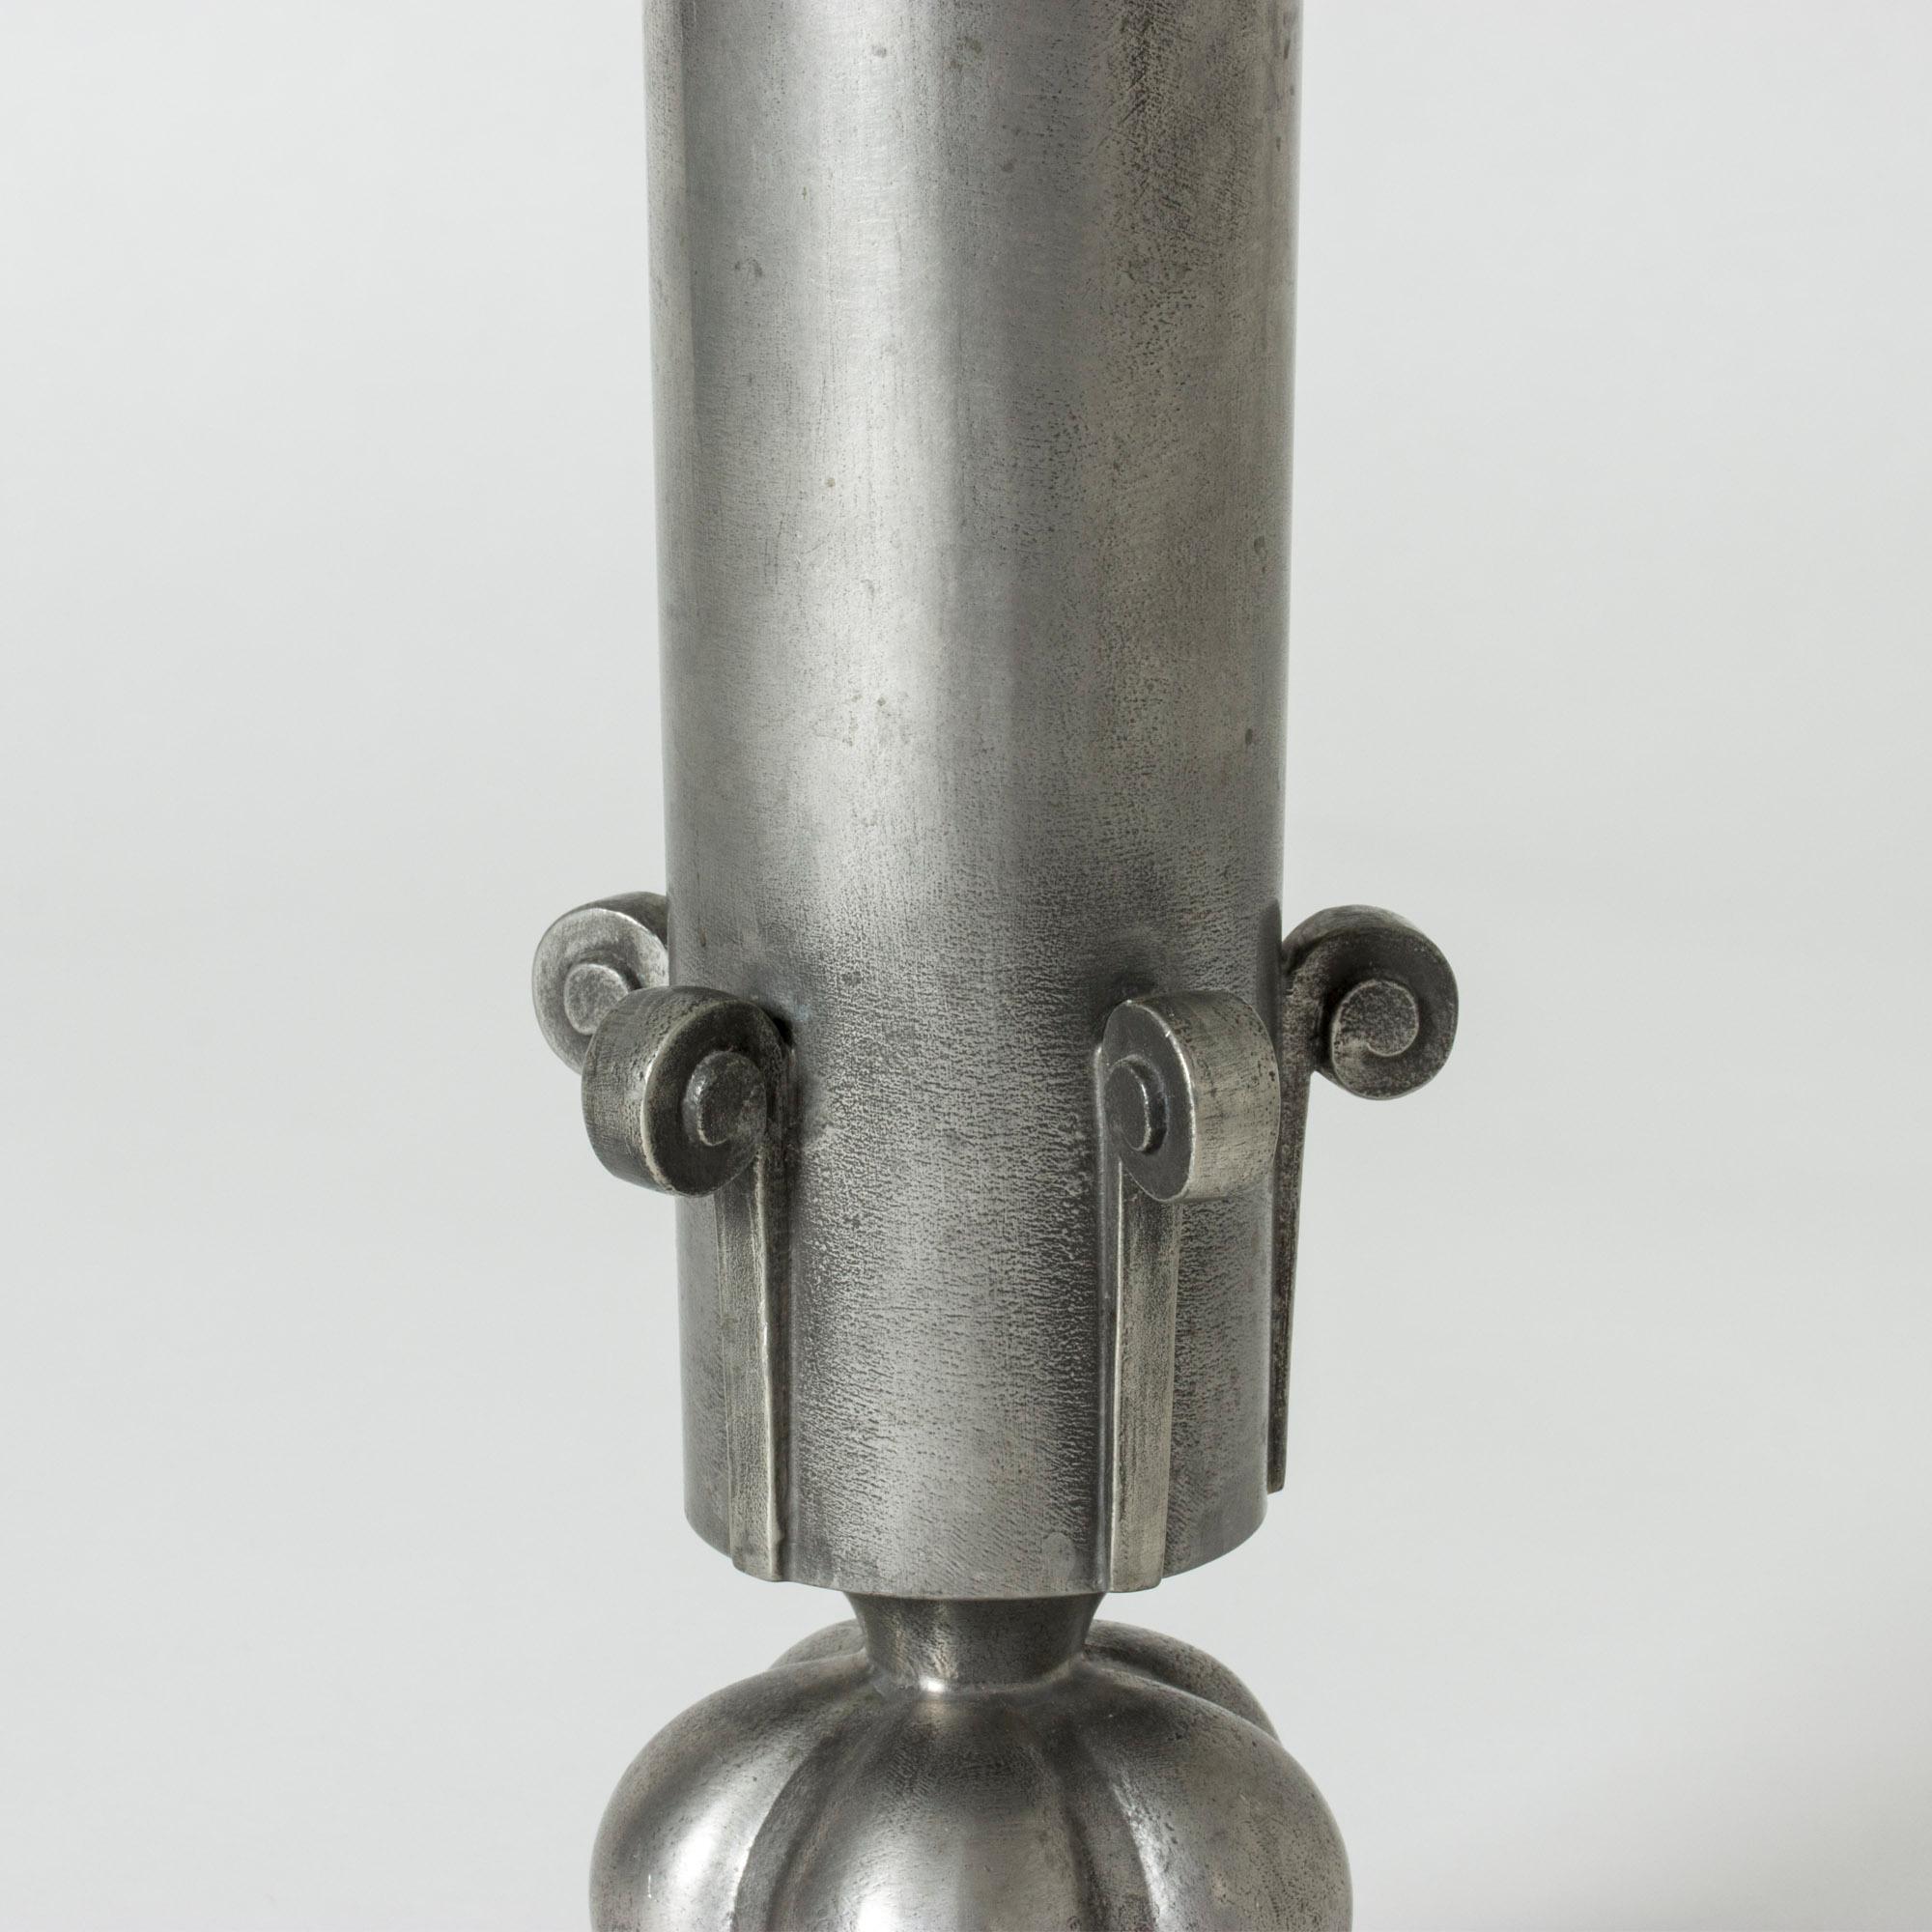 Swedish Pewter Vase by Edvin Ollers, Designed in 1936